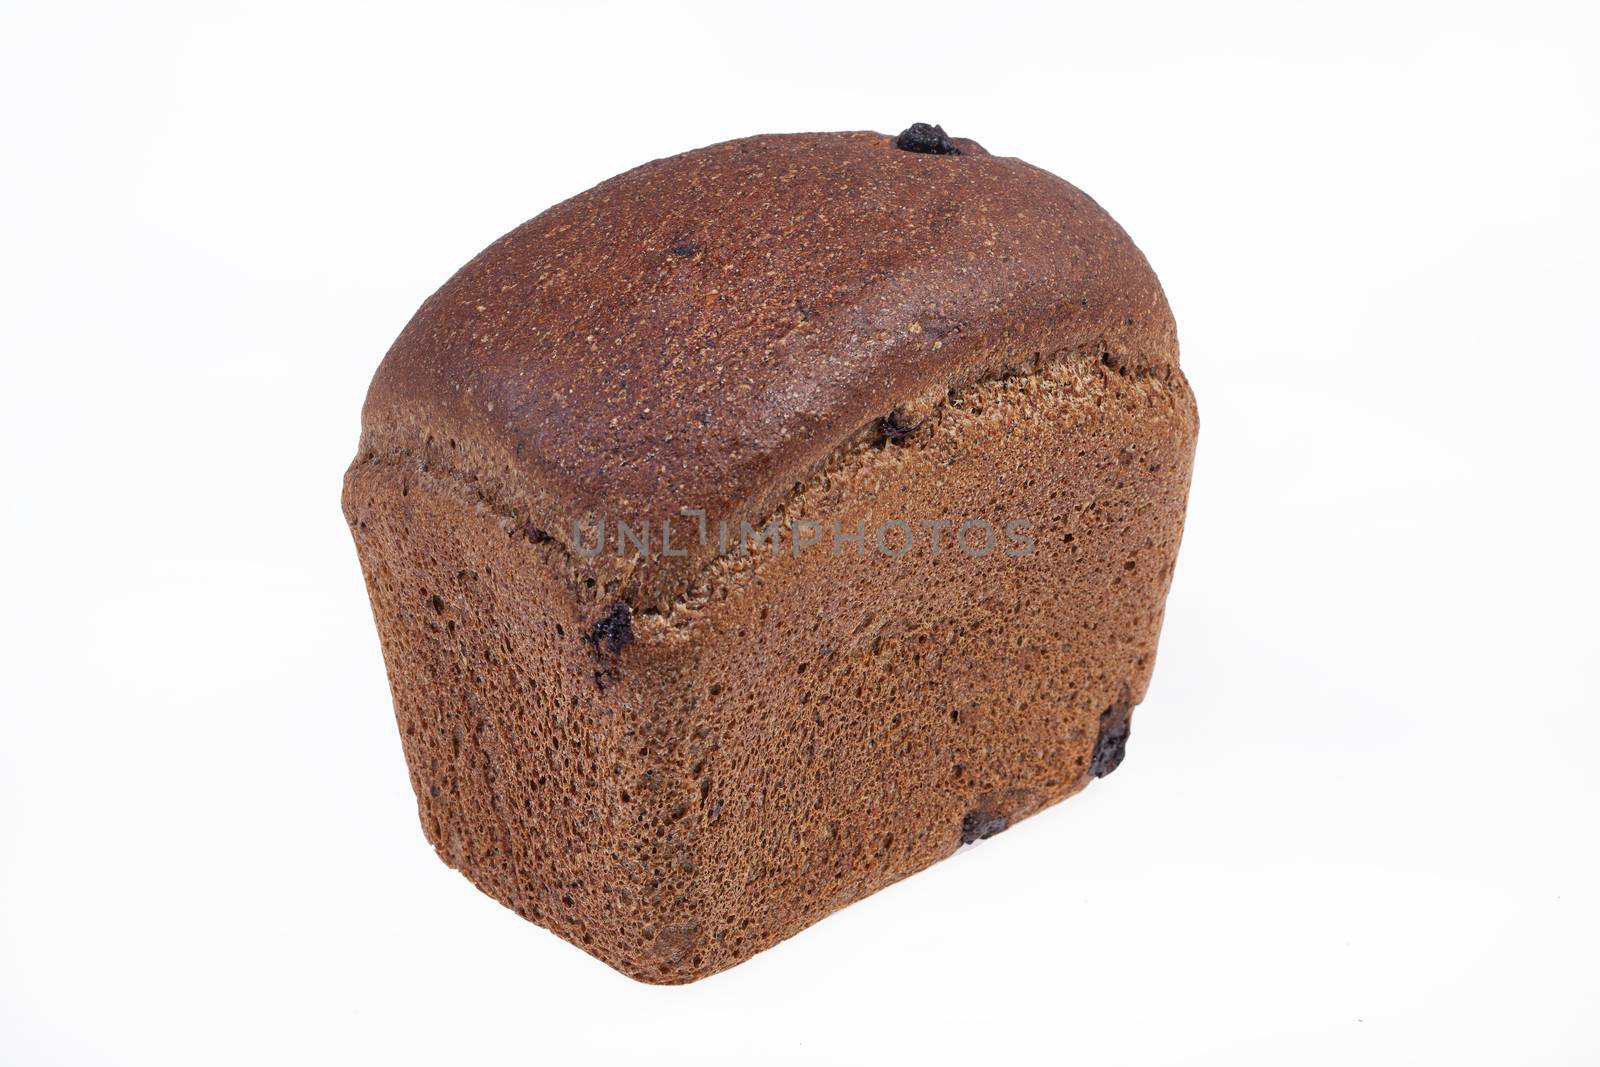 Loaf of bread on isolated white background